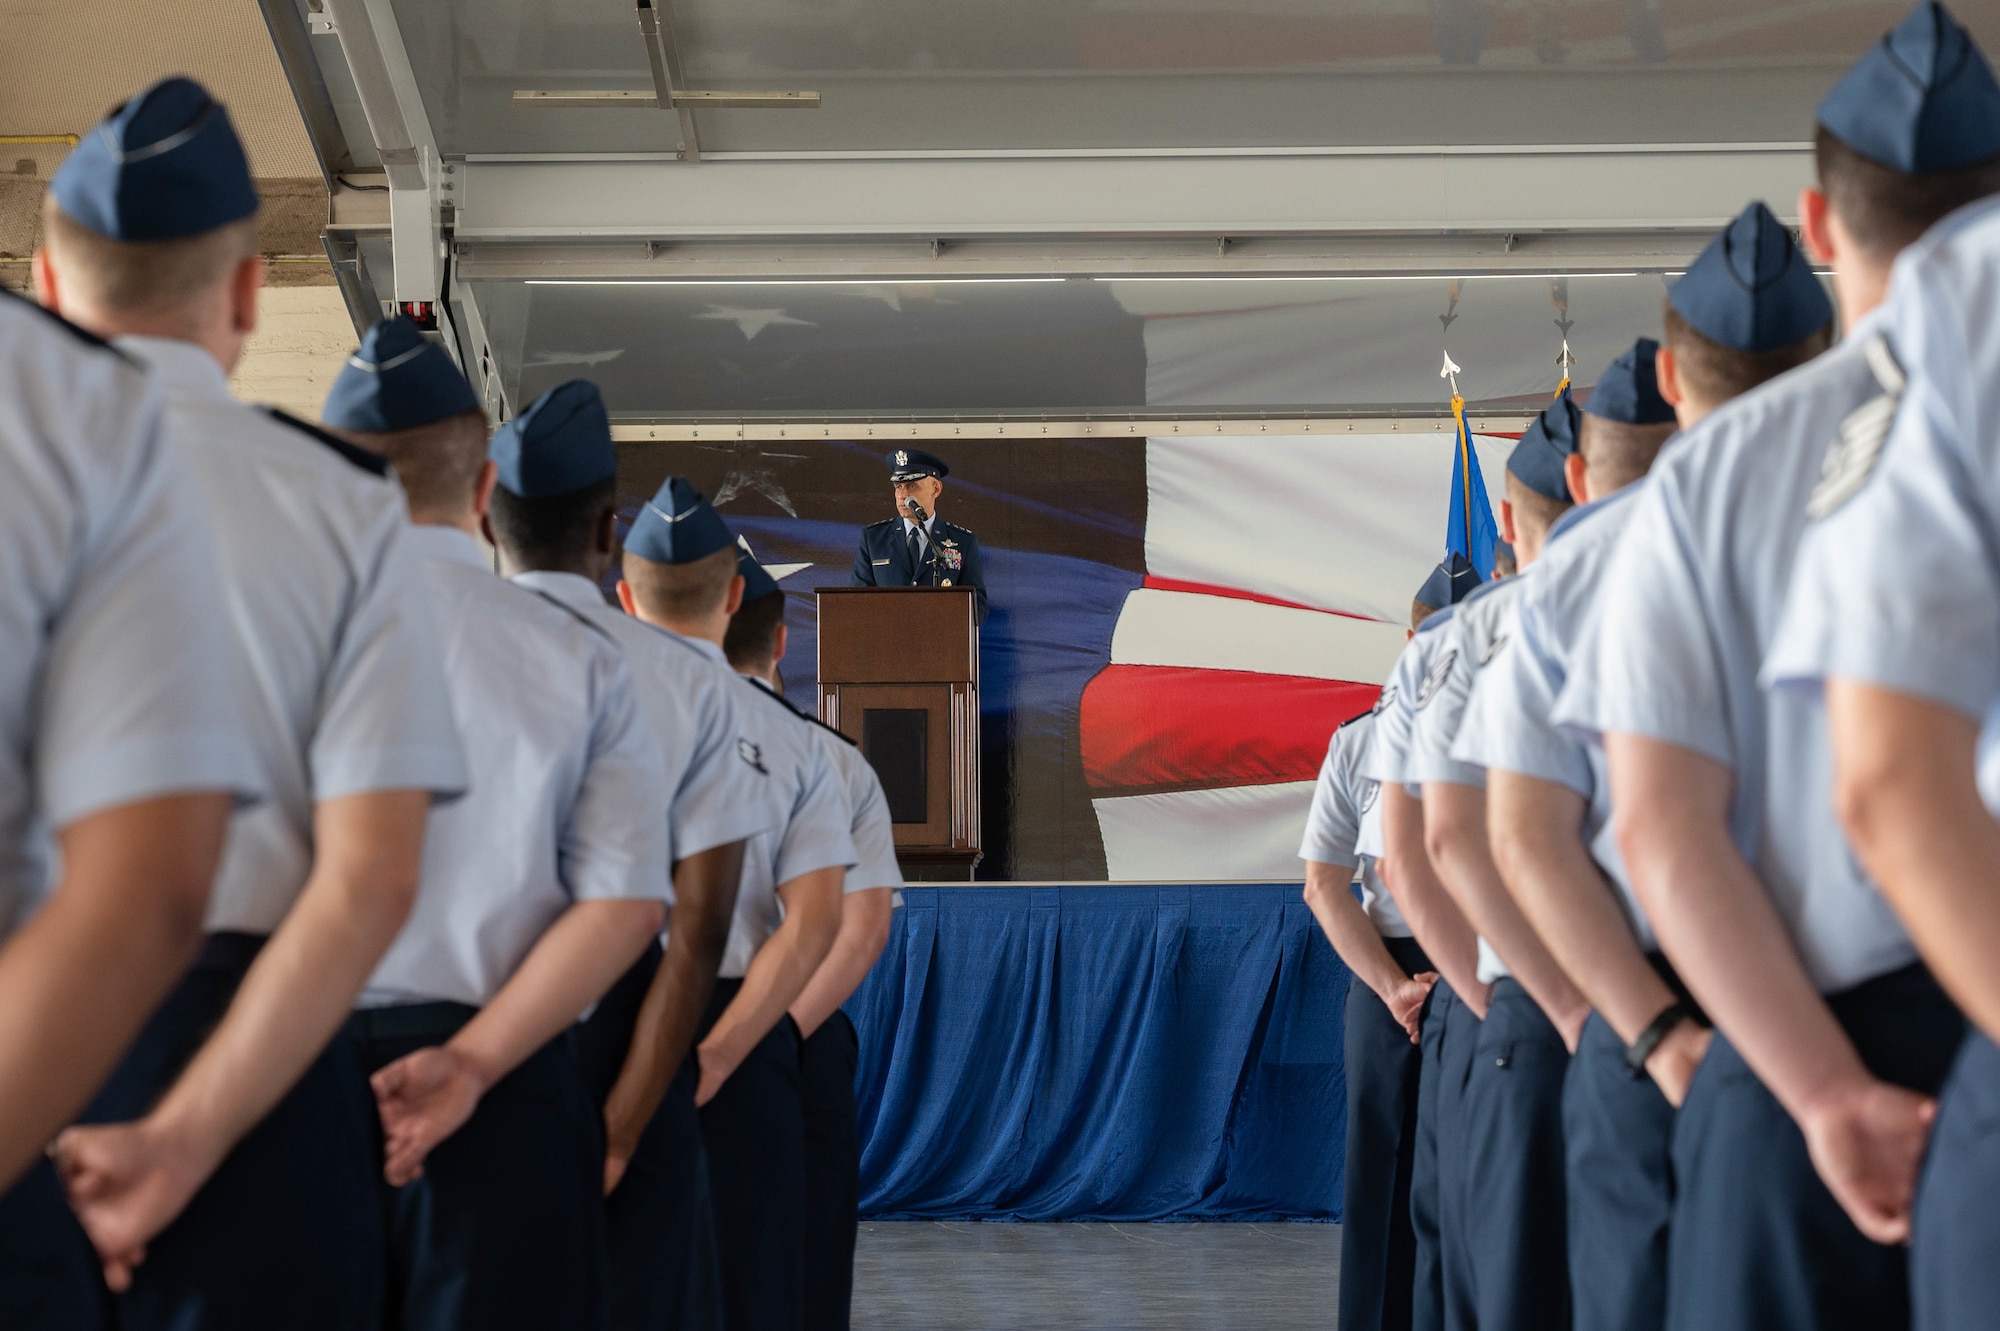 U.S. Air Force Lt. Gen. Brian S. Robinson, commander of Air Education and Training Command, gives opening remarks during the opening of the 19th Air Force change of command ceremony August 19, 2022, at Joint Base San Antonio-Randolph, Texas. AETC is responsible for training more than 293,000 students per year with about 60,000 active-duty, Reserve, Guard, civilian and contractor personnel. (U.S. Air Force photo by Senior Airman Tyler McQuiston)